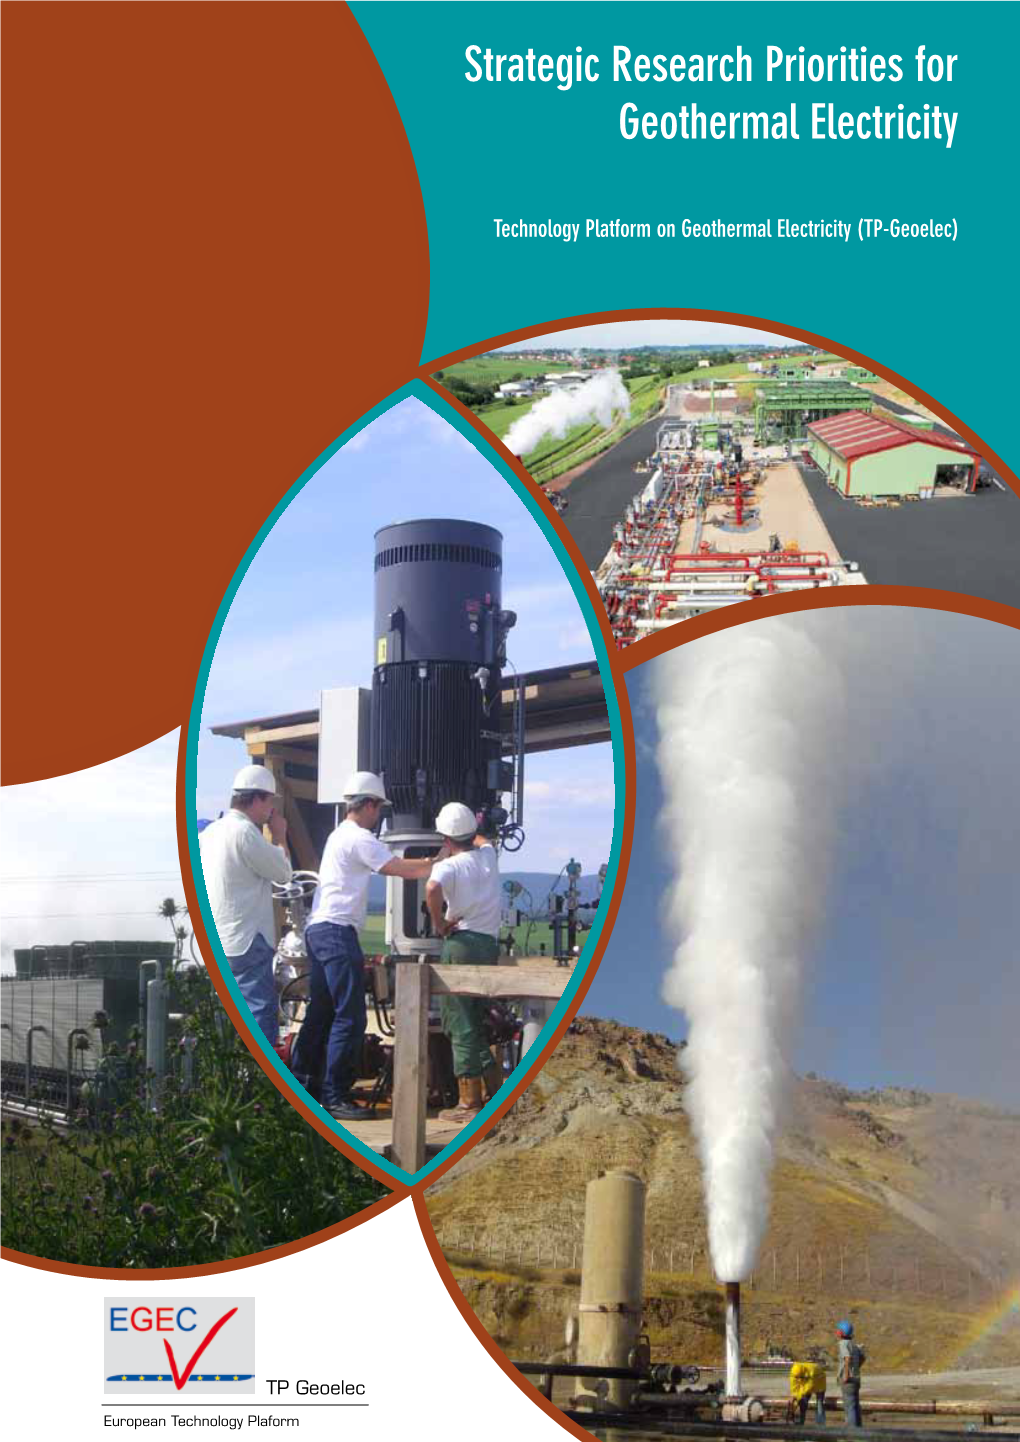 Strategic Research Priorities for Geothermal Electricity